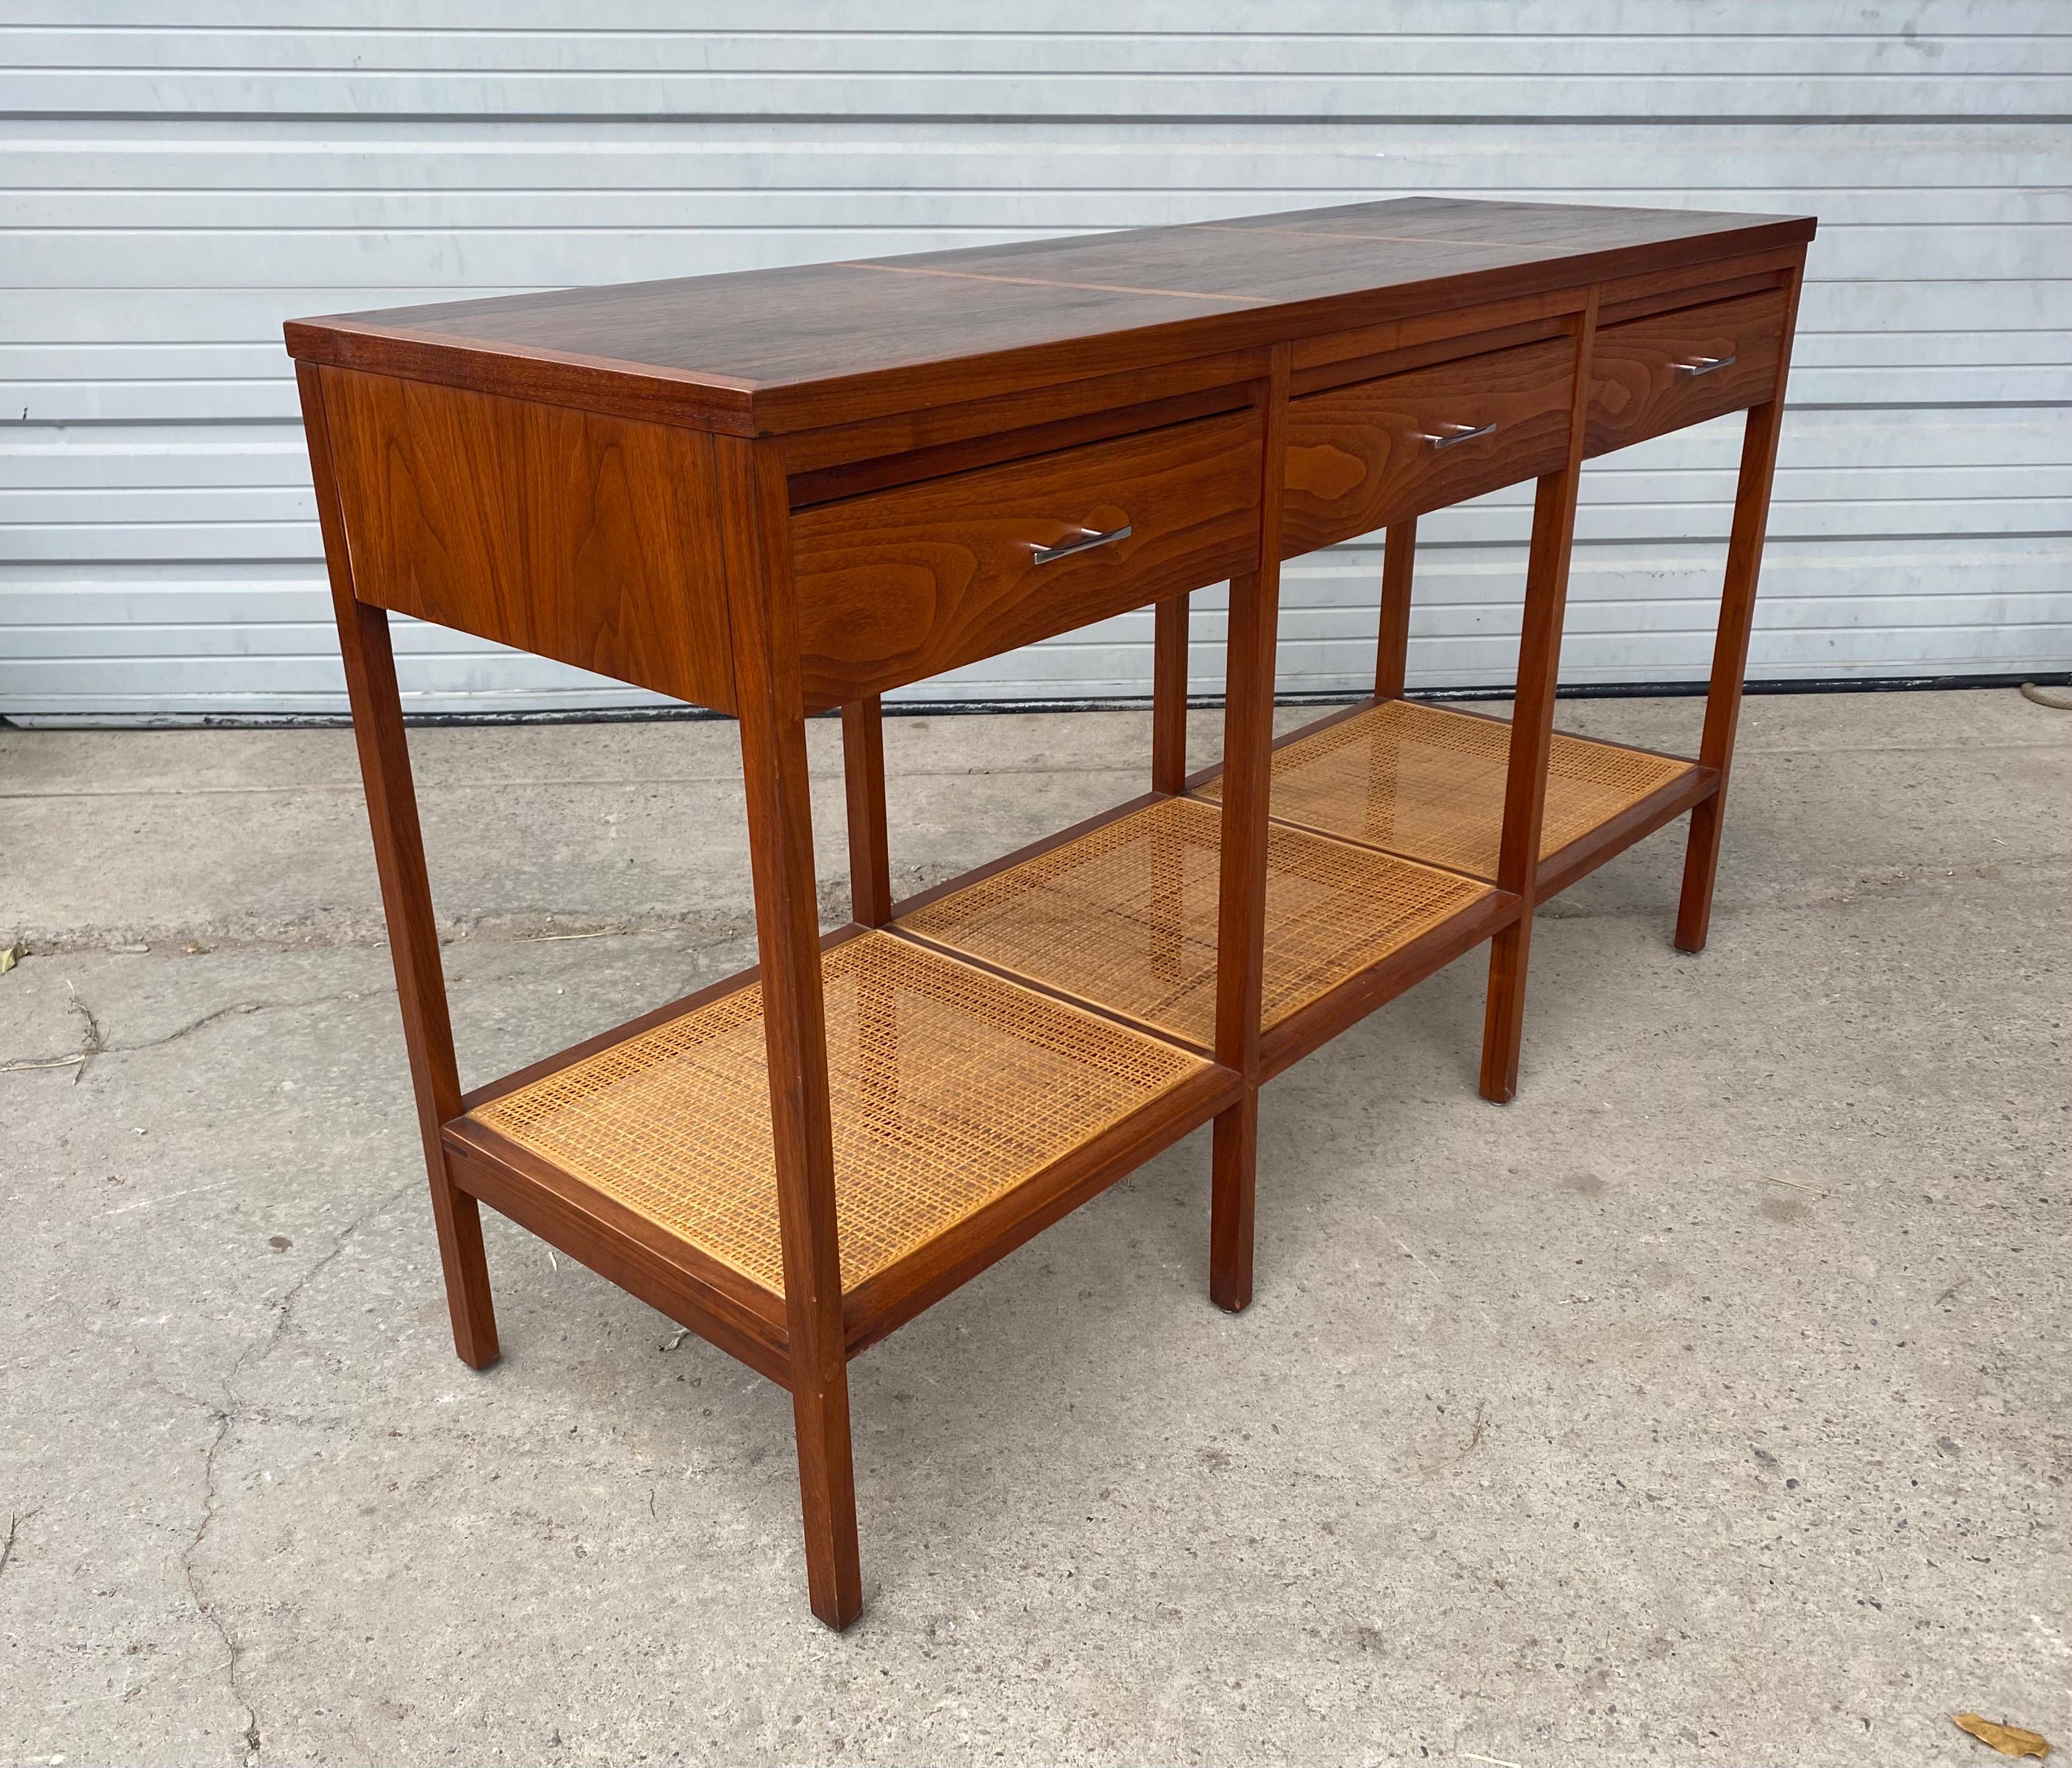 Stunning Rosewood and Cane Console Table, Paul McCobb for Lane / Delineator 1